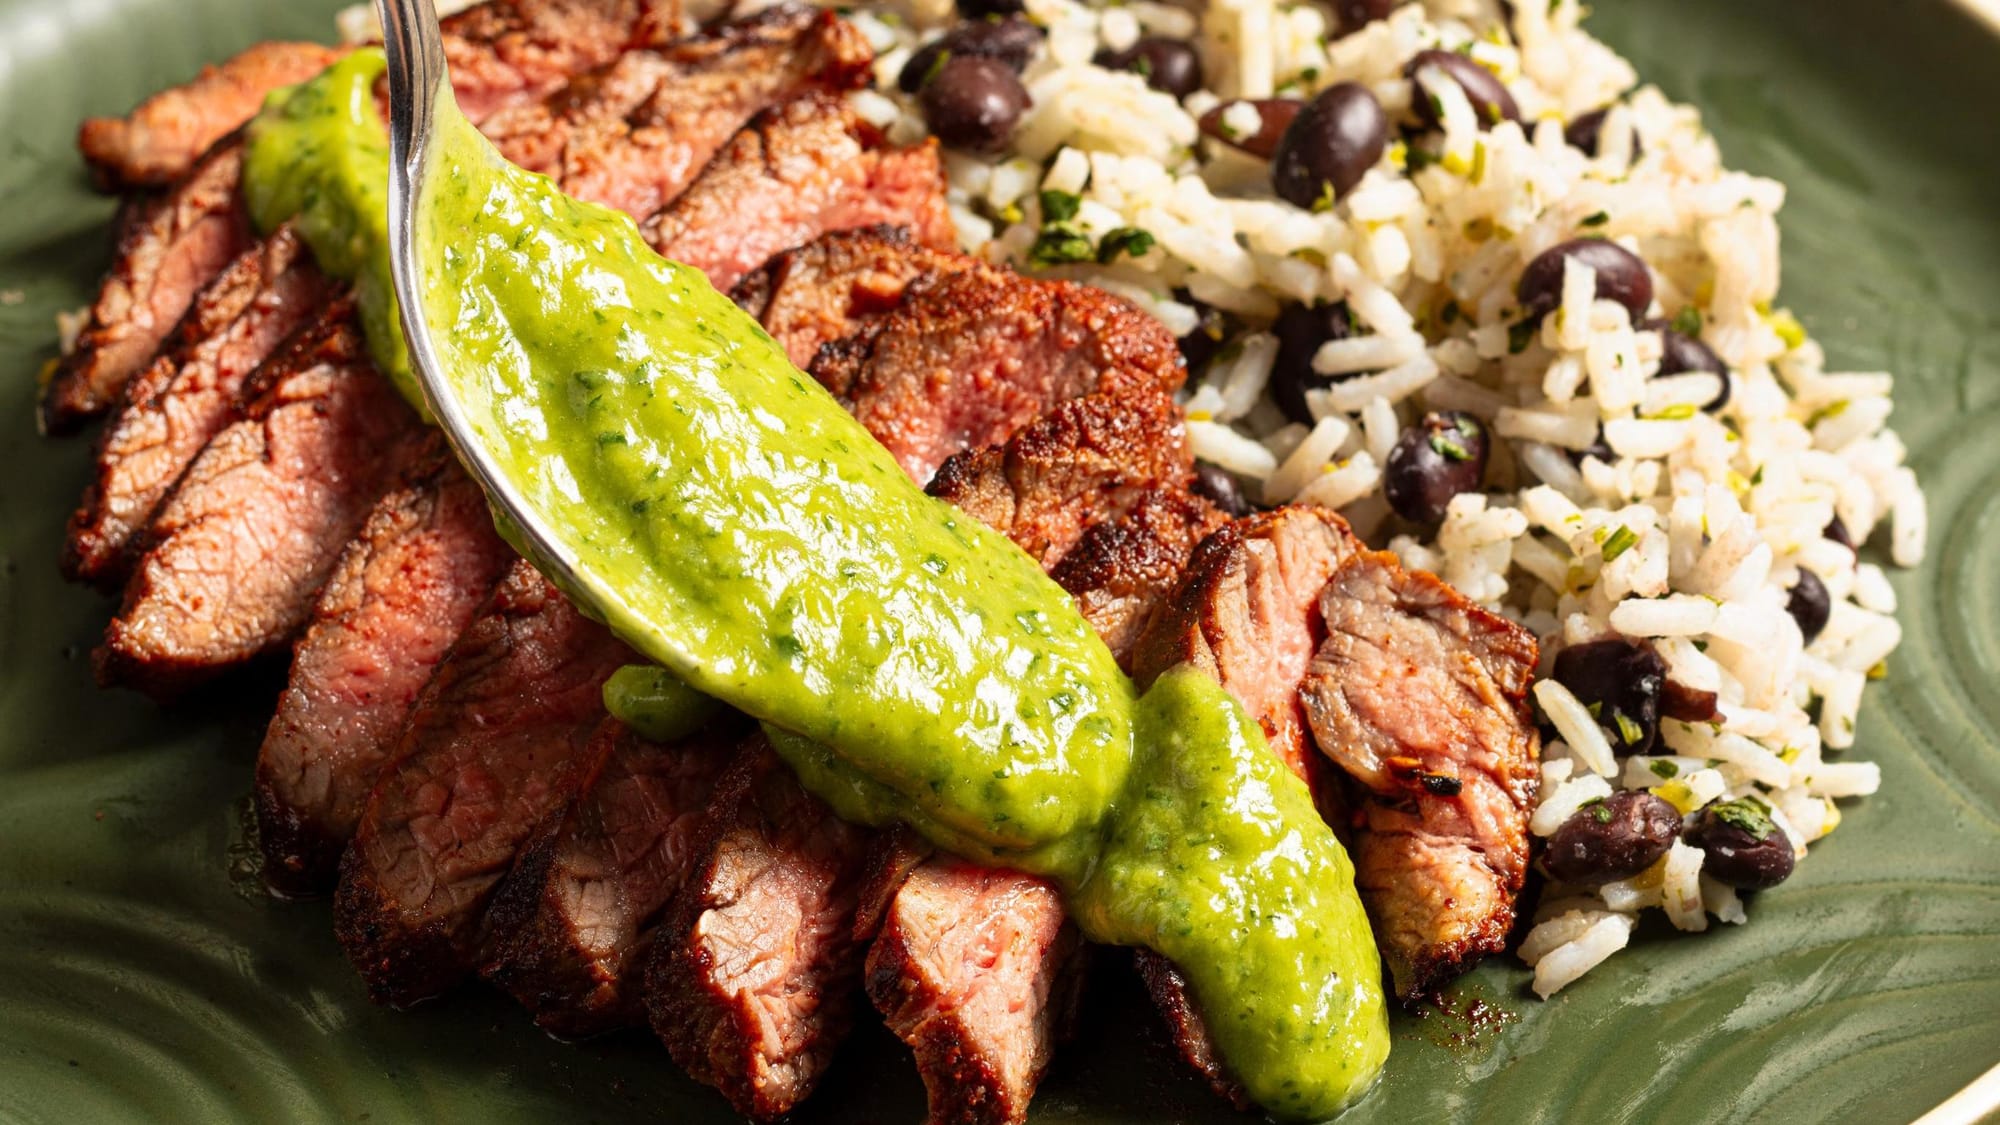 These spiced steaks become a complete meal with a side of rice and beans